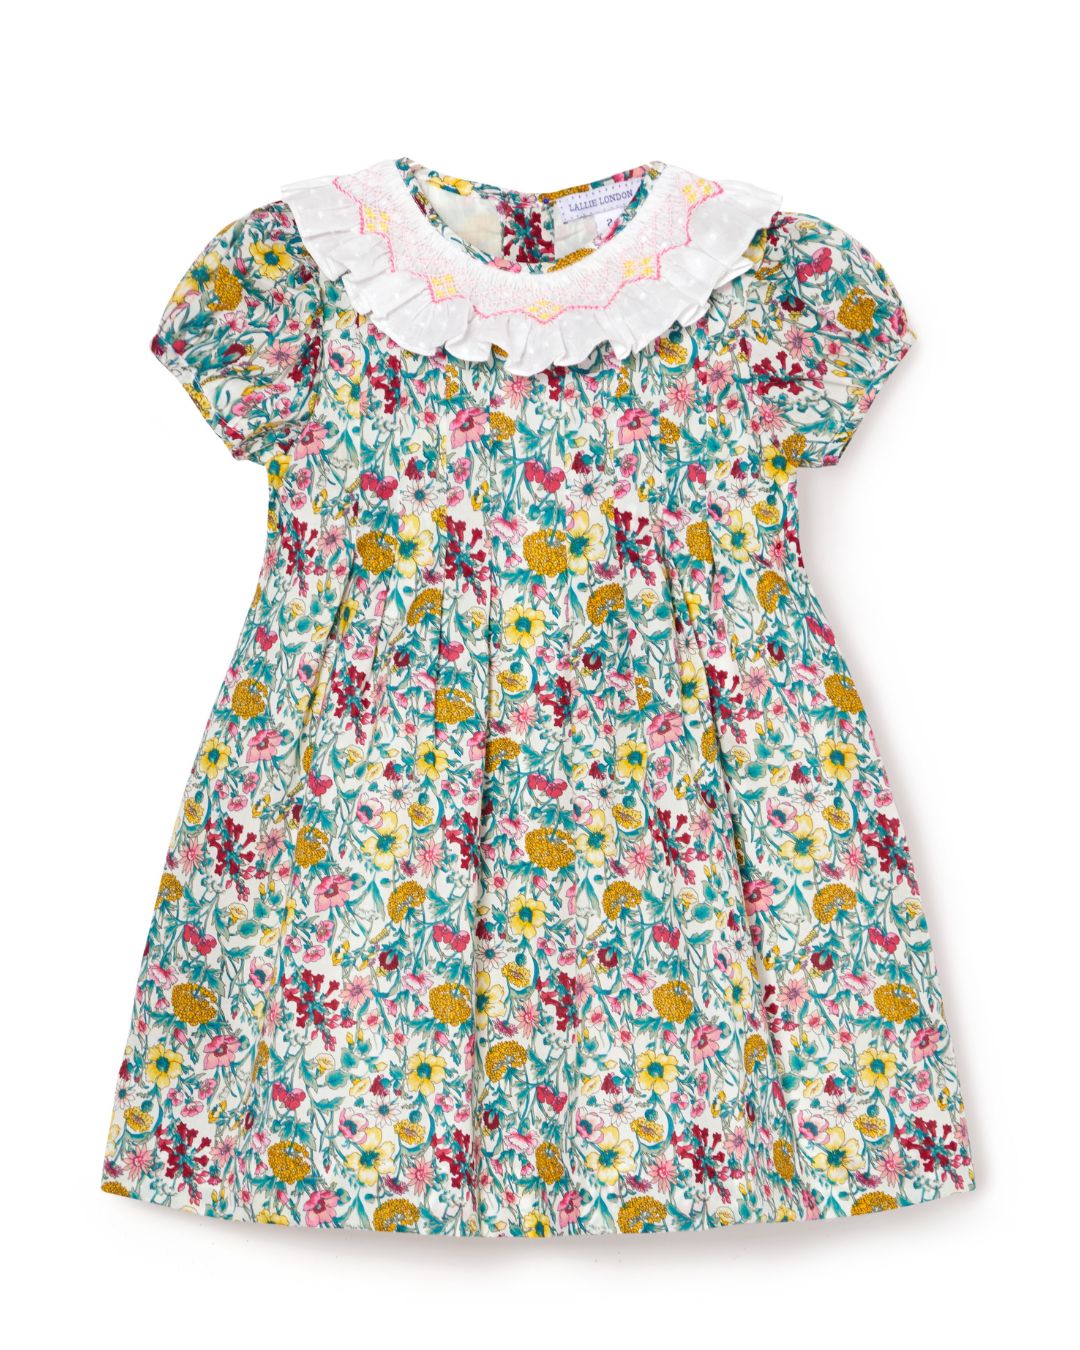 Charlotte Dress | Hand Smocked Frill Collar Dress in Pink and Green floral